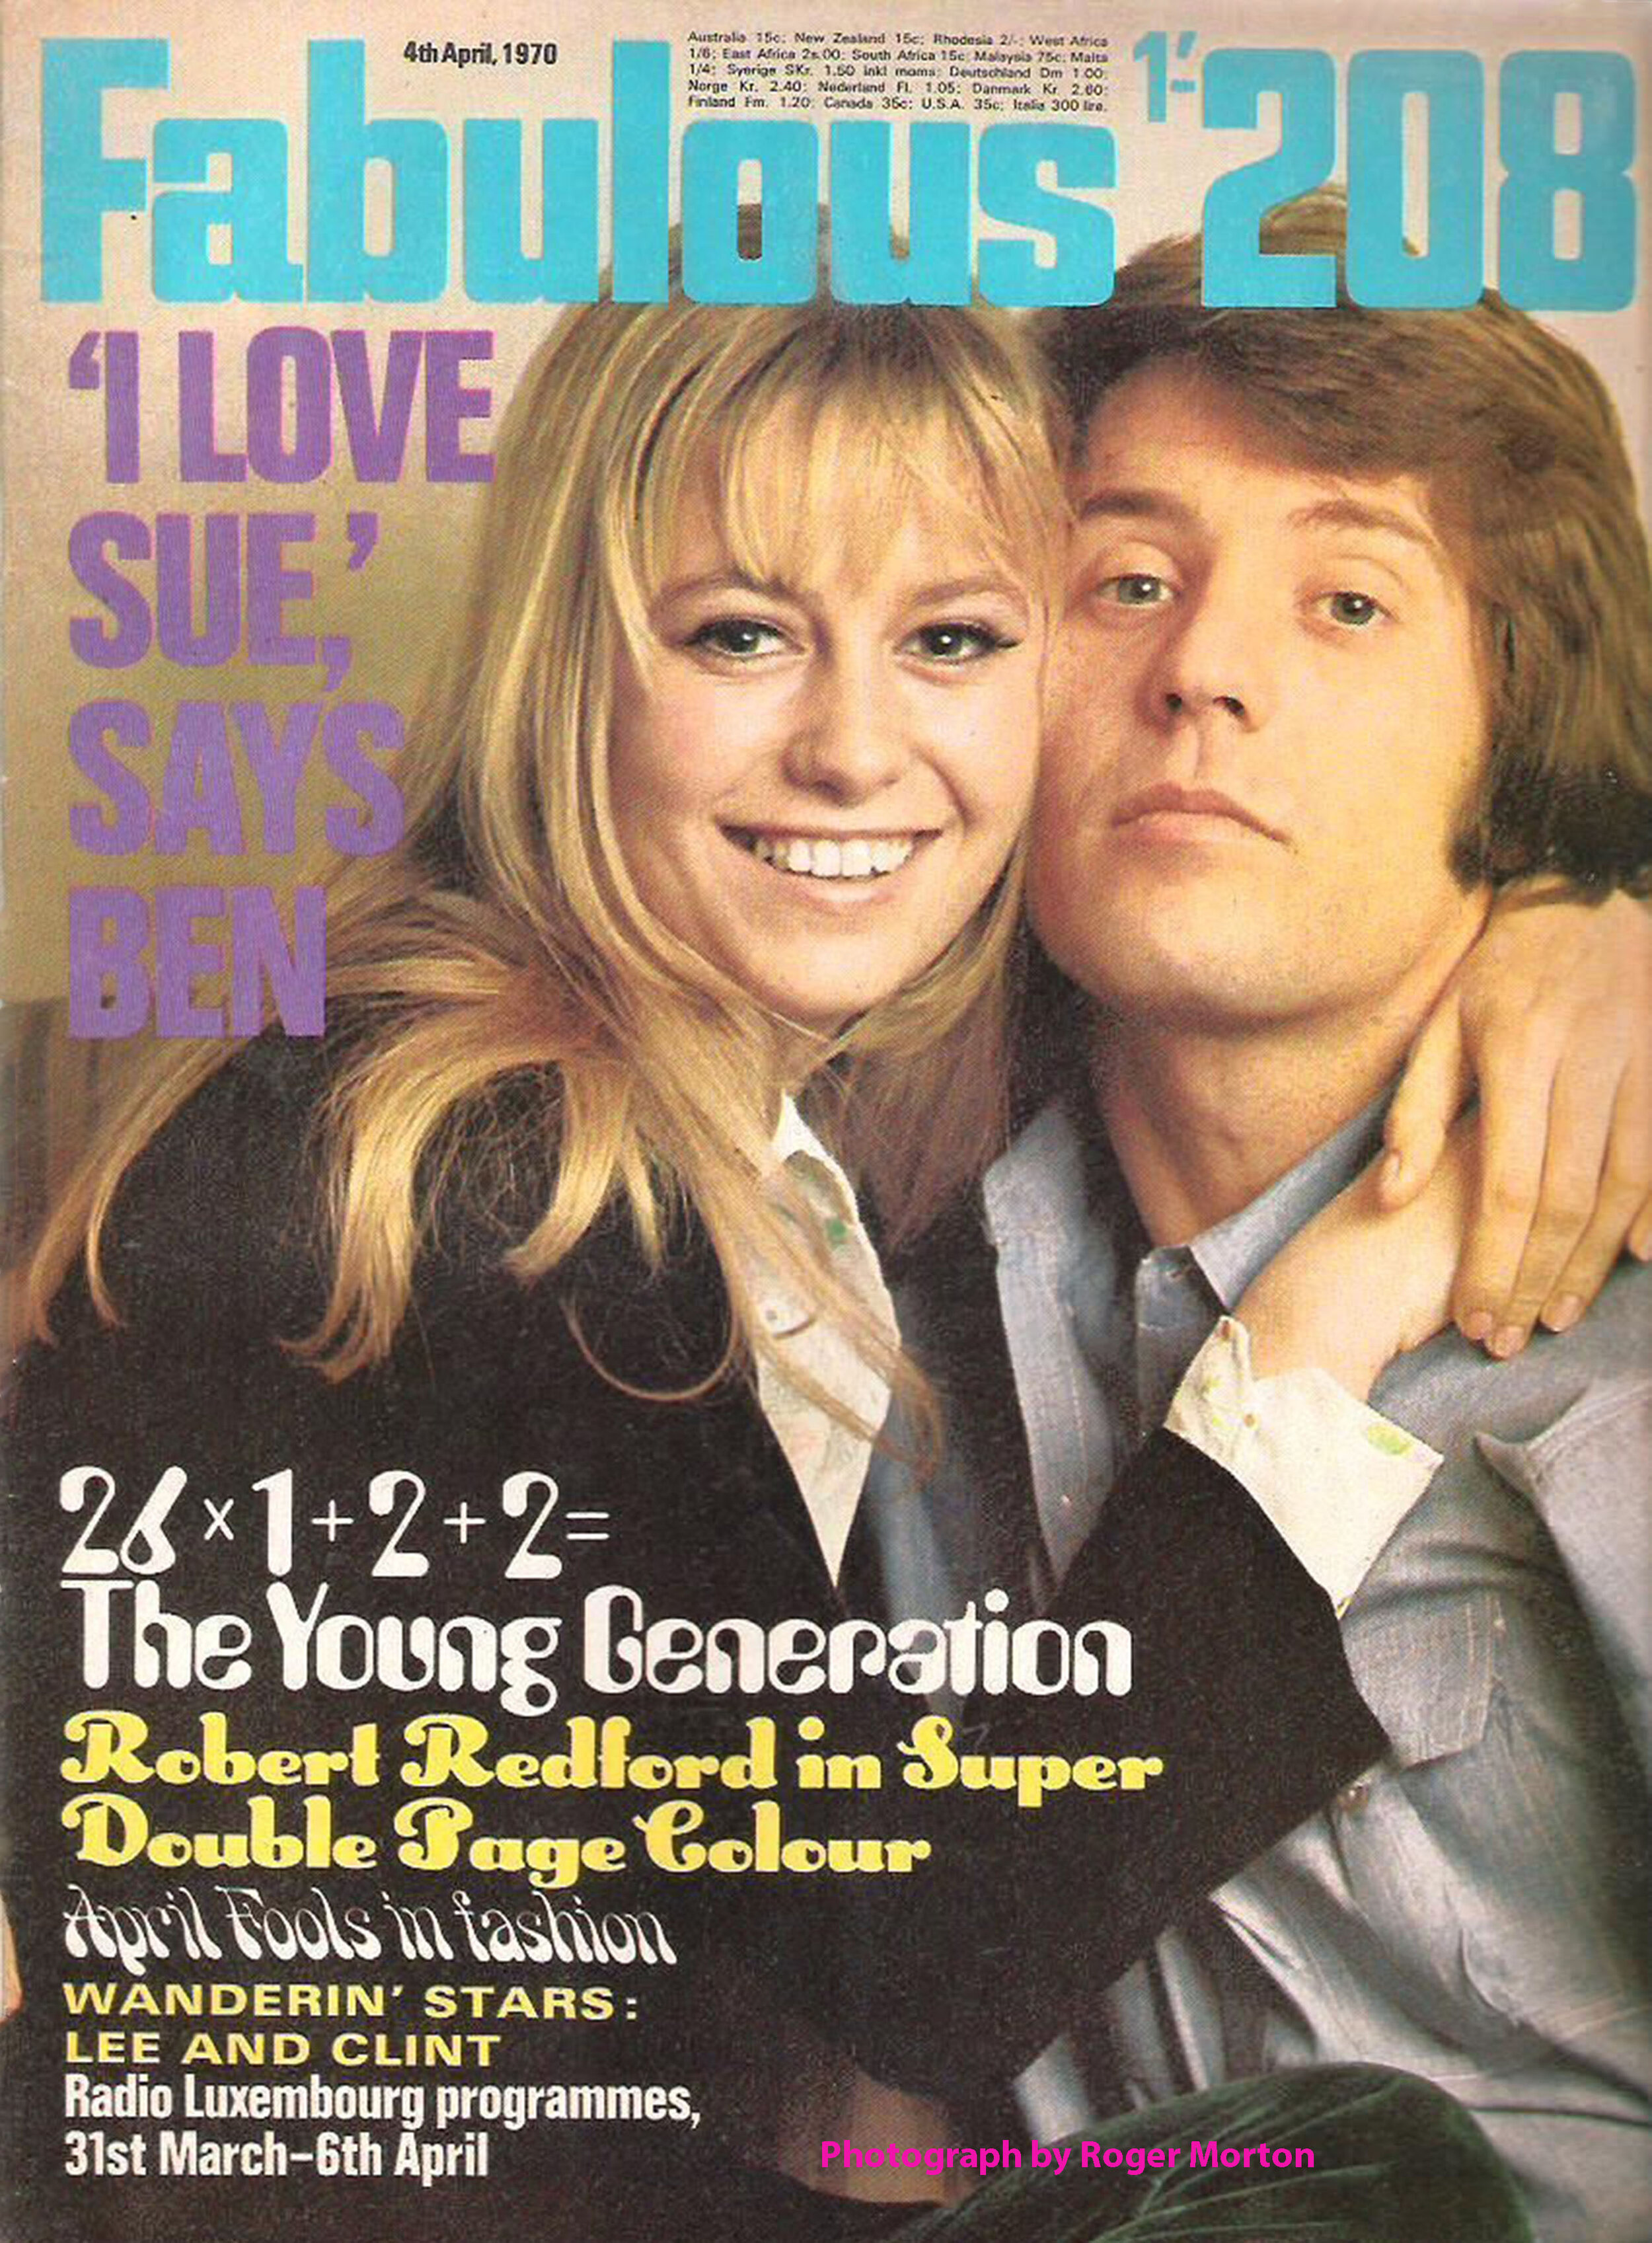 Susan George on Fabulous 208 cover